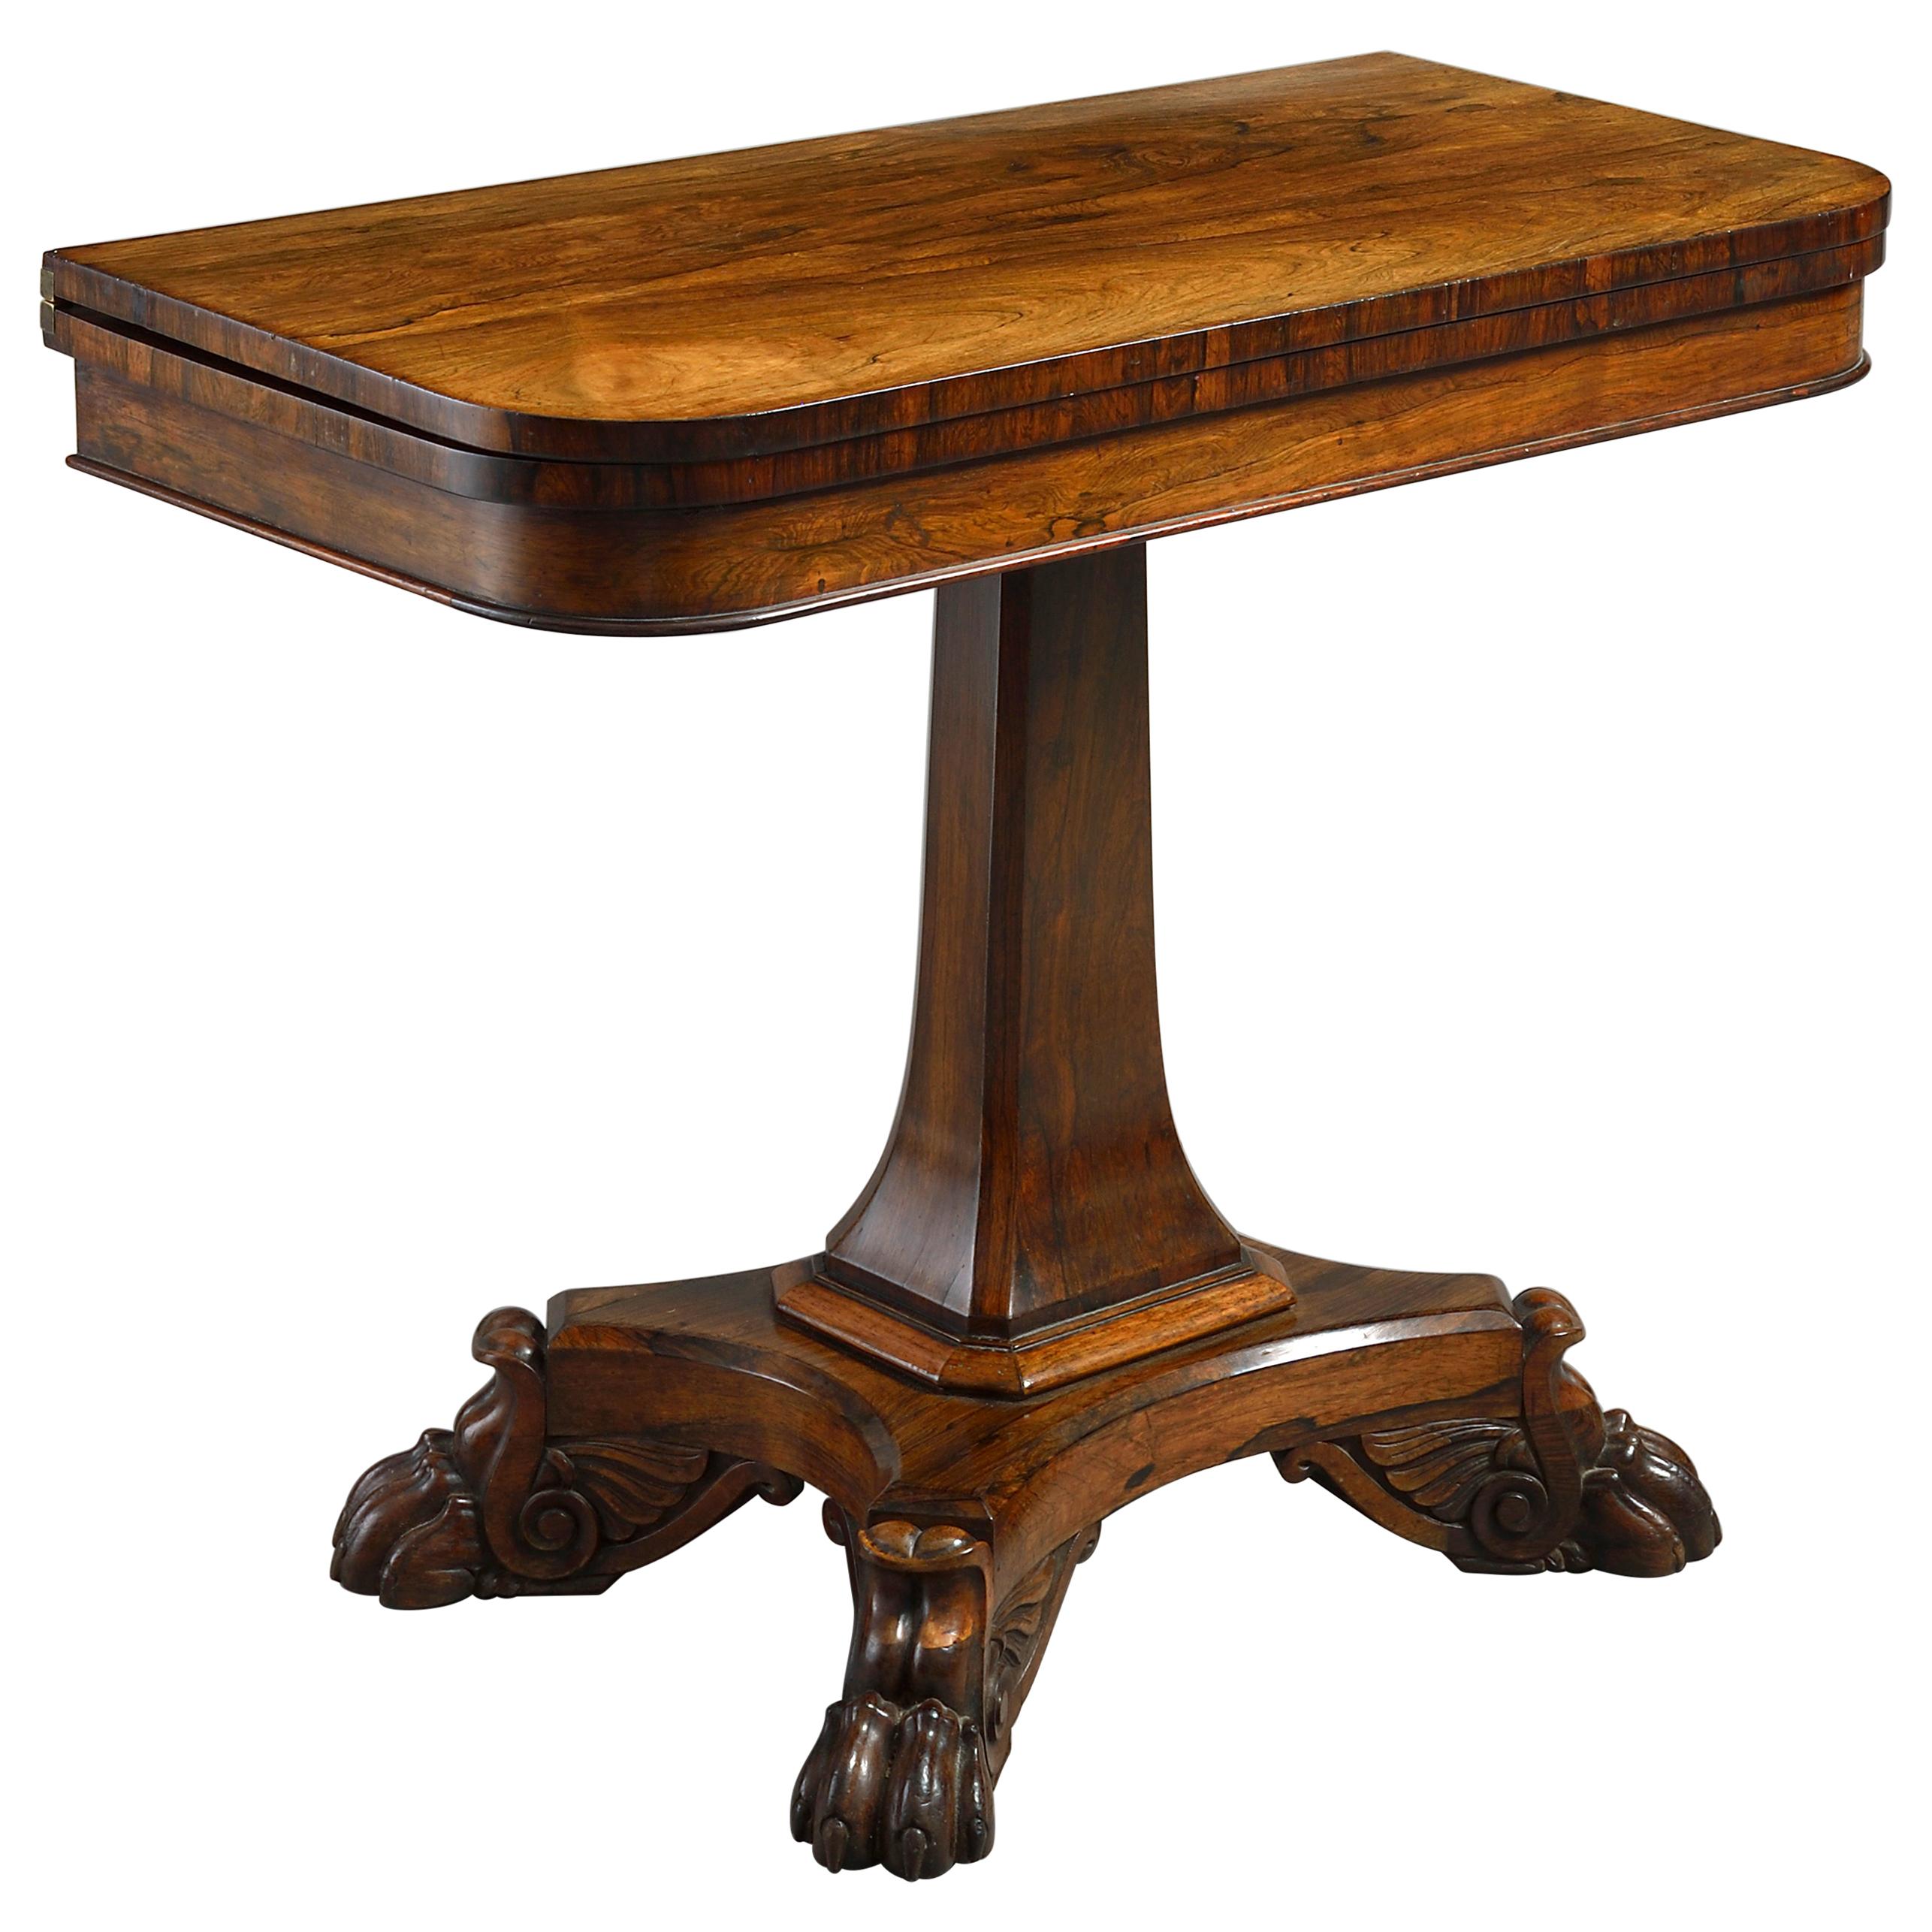 Early 19th Century Regency Period Rosewood Tea Table